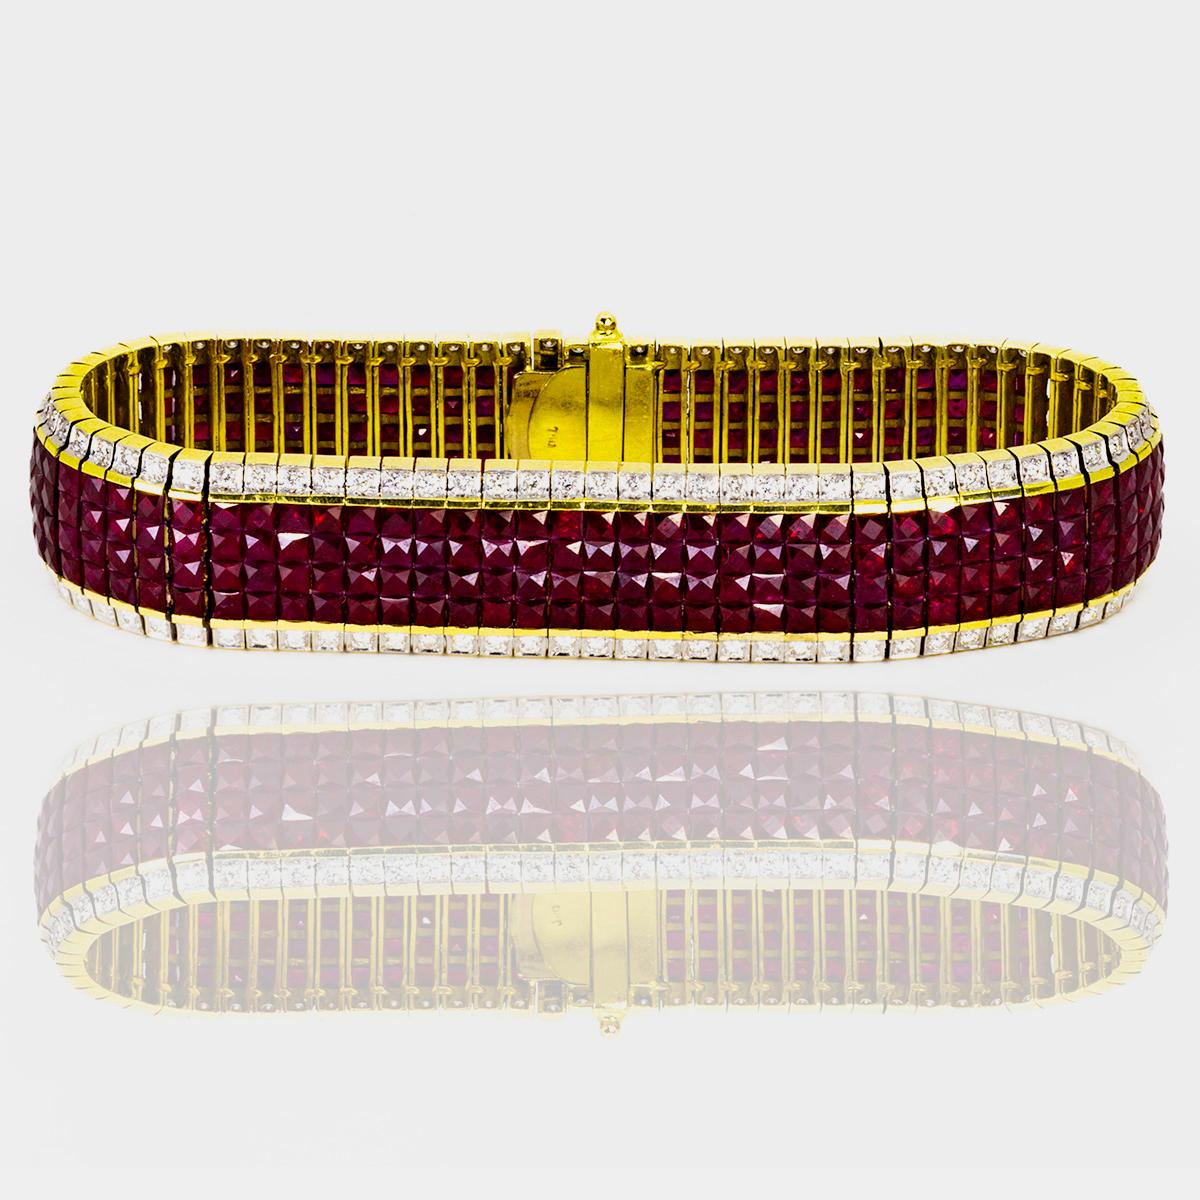 Gorgeous 18k Bracelet set with 312 Invisible set fine rubies weighing approximately 25.00 carats and 156 round fine white diamonds weighing approximately 3.00 carats. 7 1/2